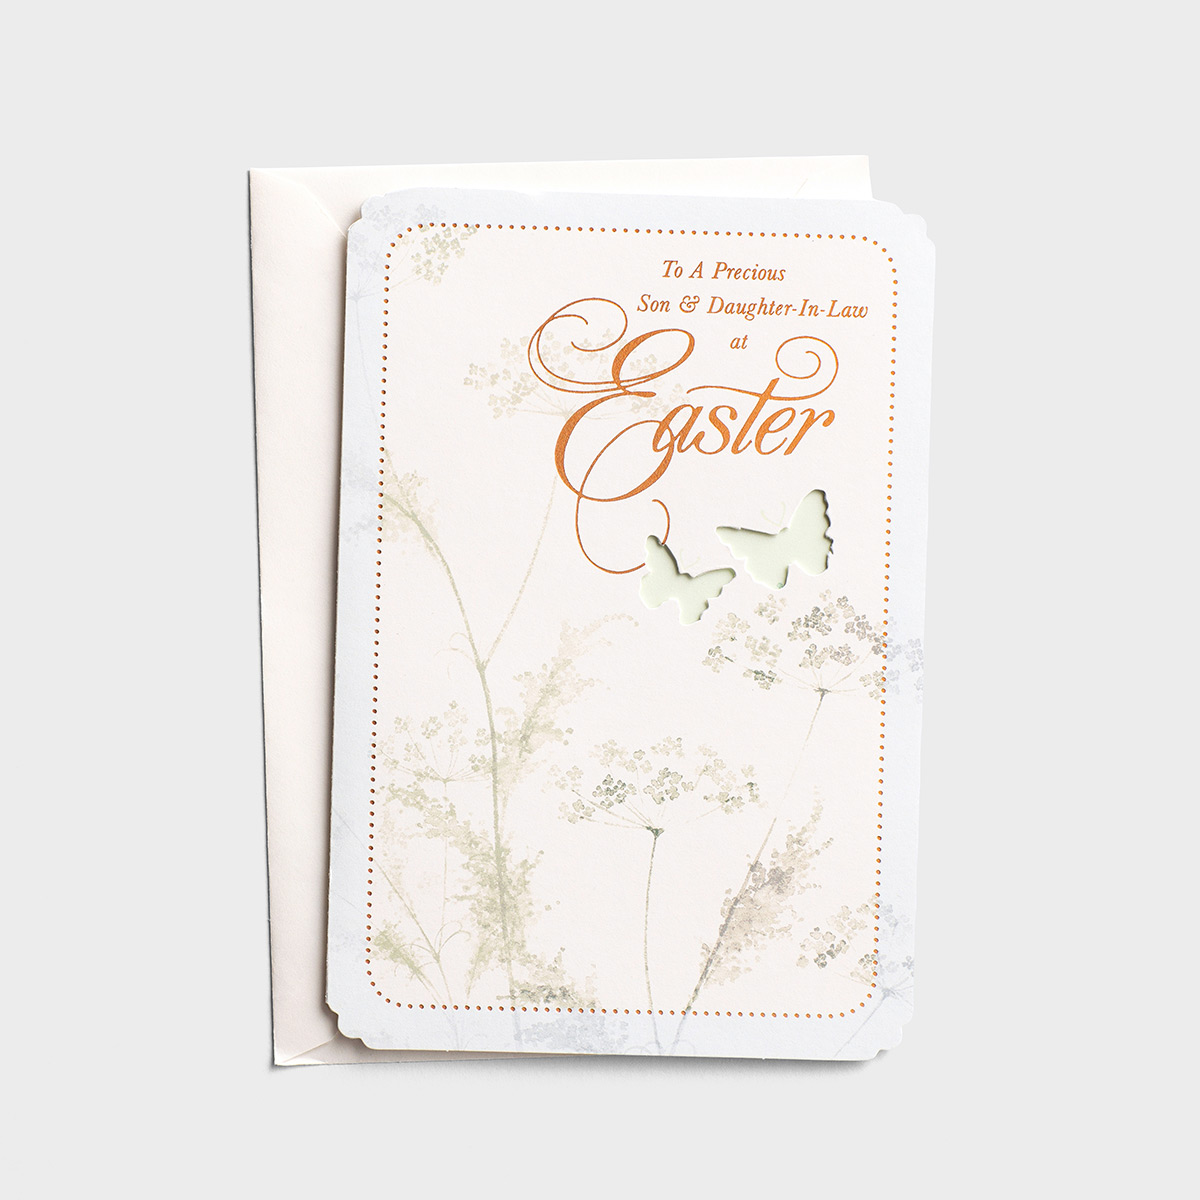 Easter - To A Precious Son & Daughter-In-Law at Easter - 1 Premium Card